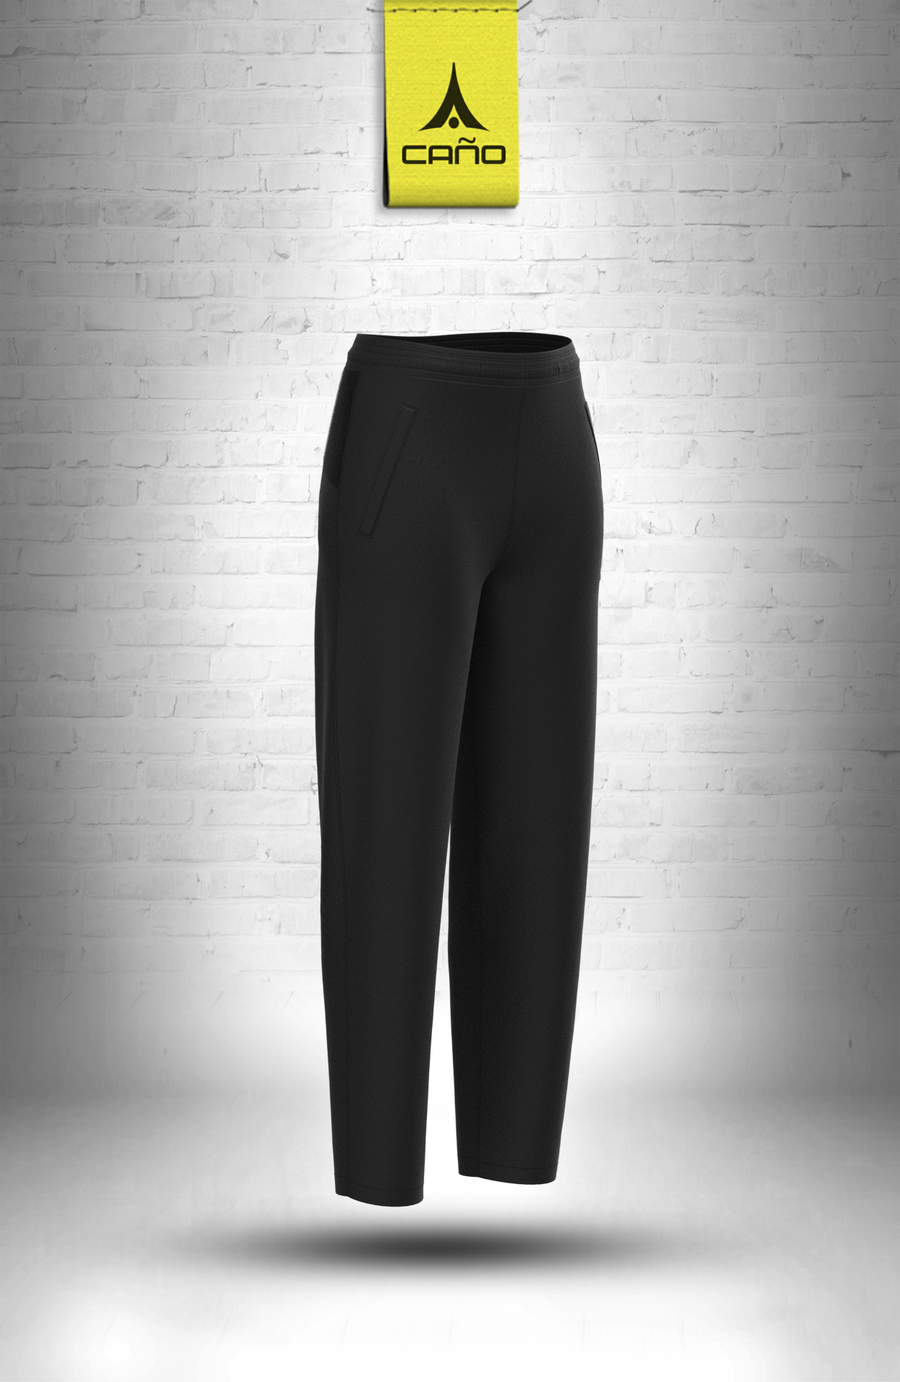 Caño - Women’s V-Warm Up Suit Pant - Clay Soccer